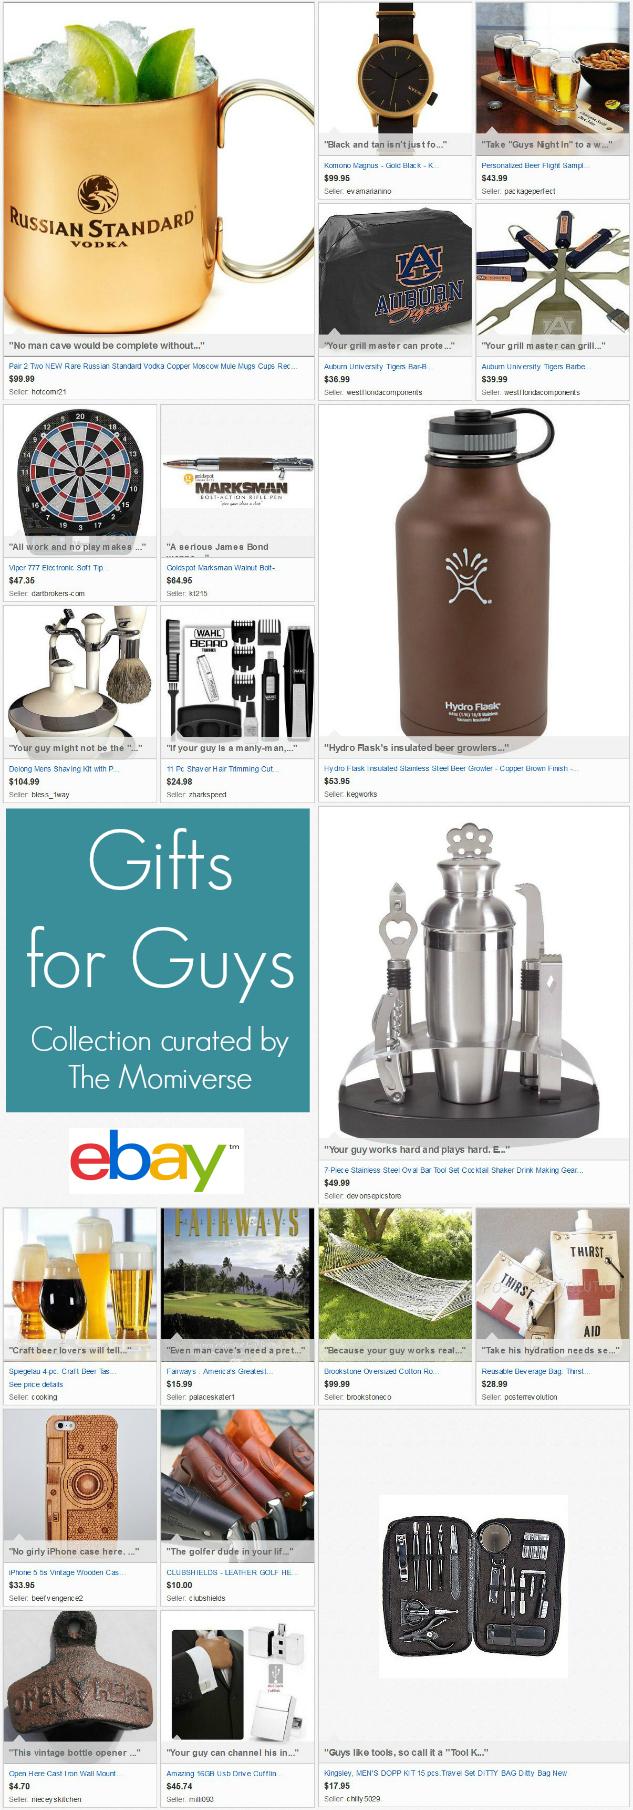 Gifts for Guys | eBay Collection curated by The Momiverse | Gift Guide